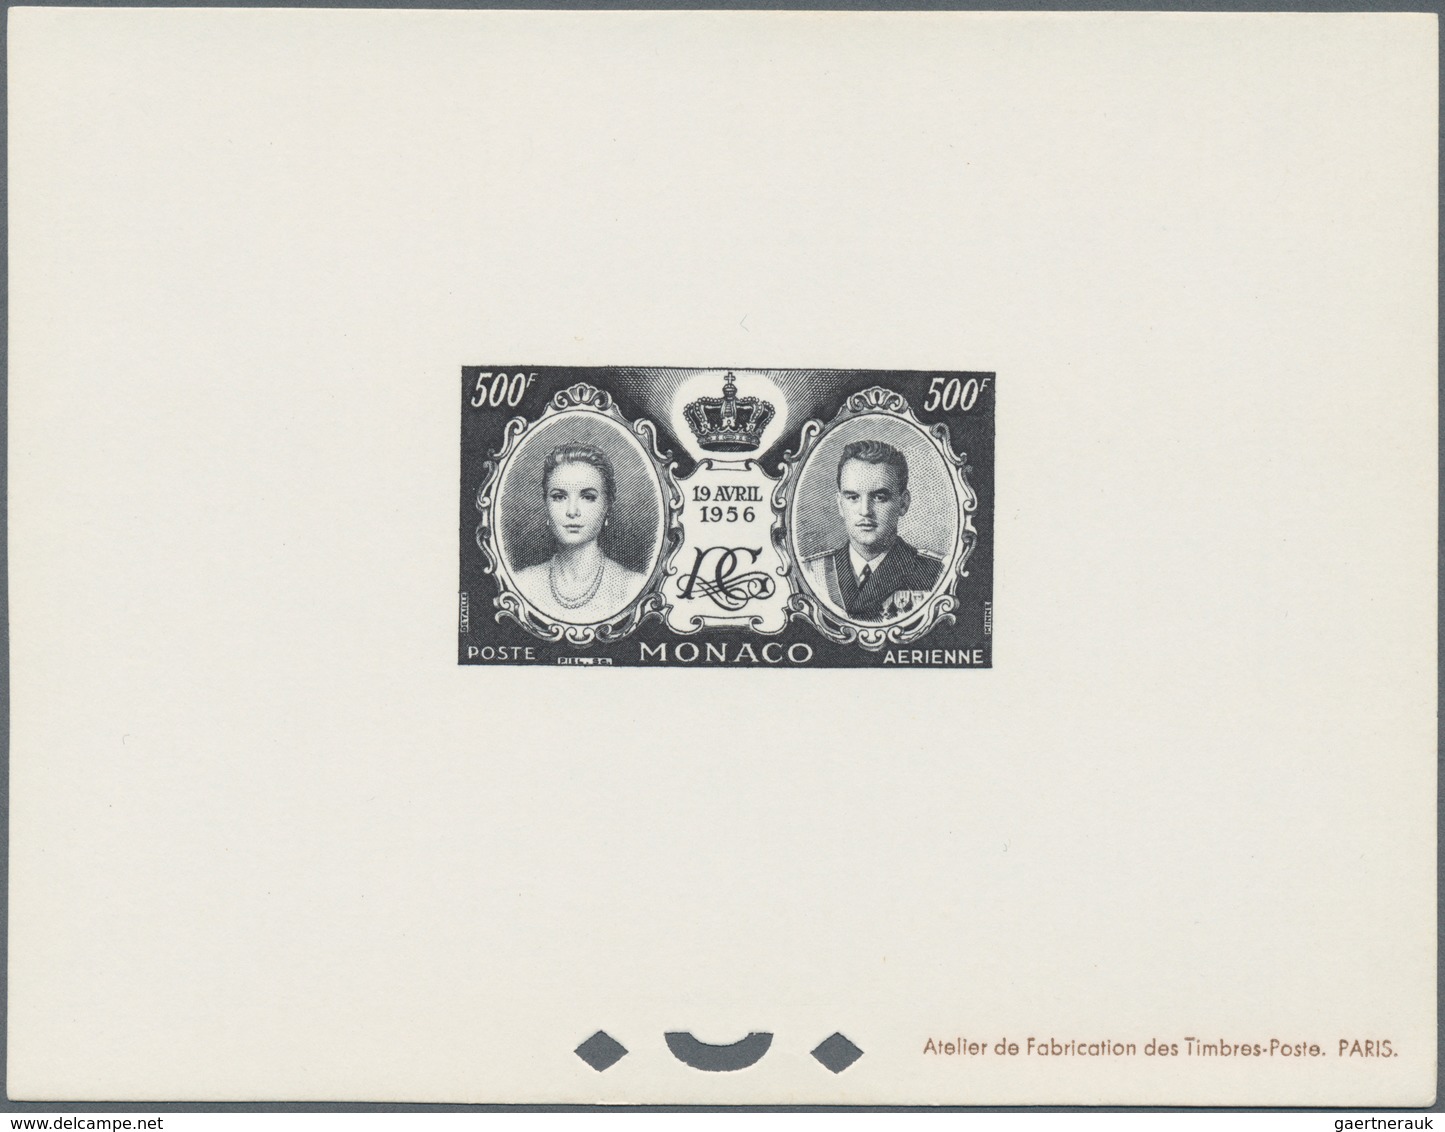 Monaco: 1956, Royal Wedding, Airmail 500fr. As Epreuve D'artiste In Black, Lot Of Ten Pieces. Maury - Used Stamps